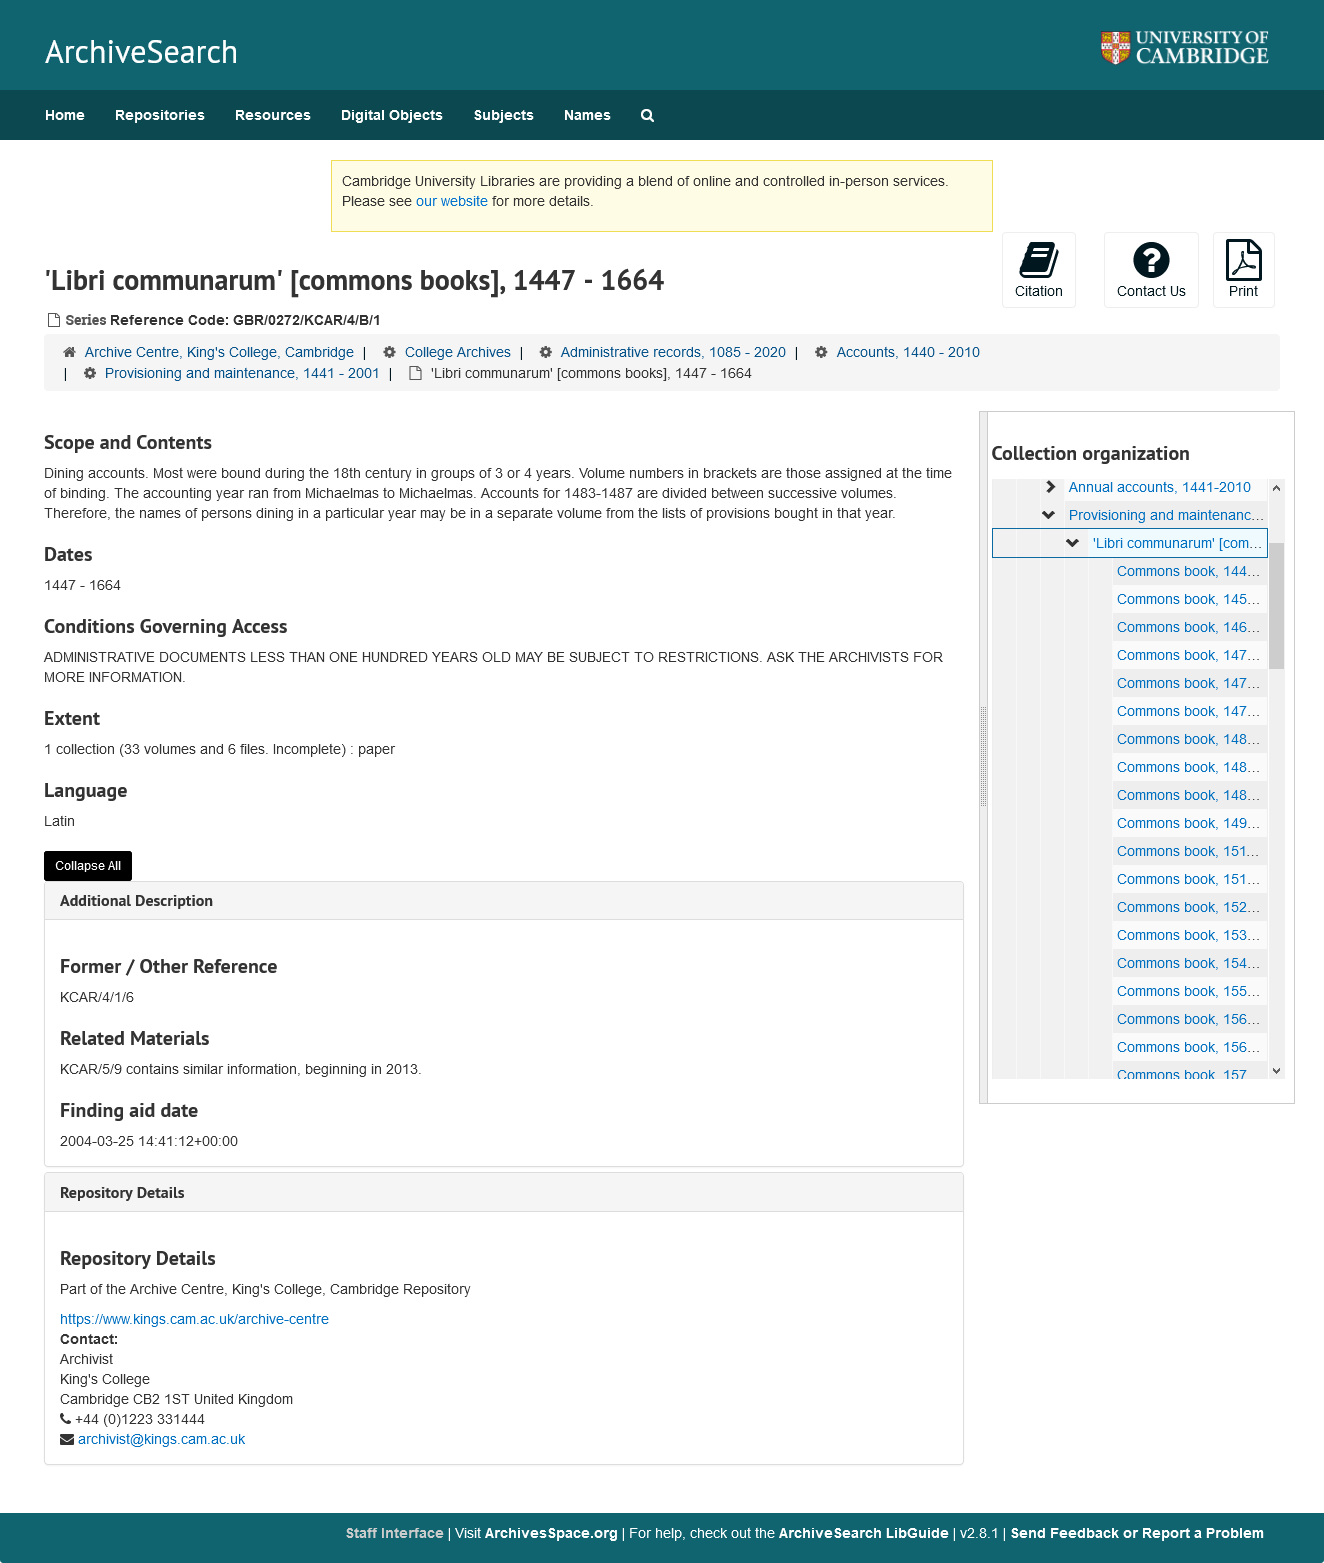 Screenshot from ArchiveSpace